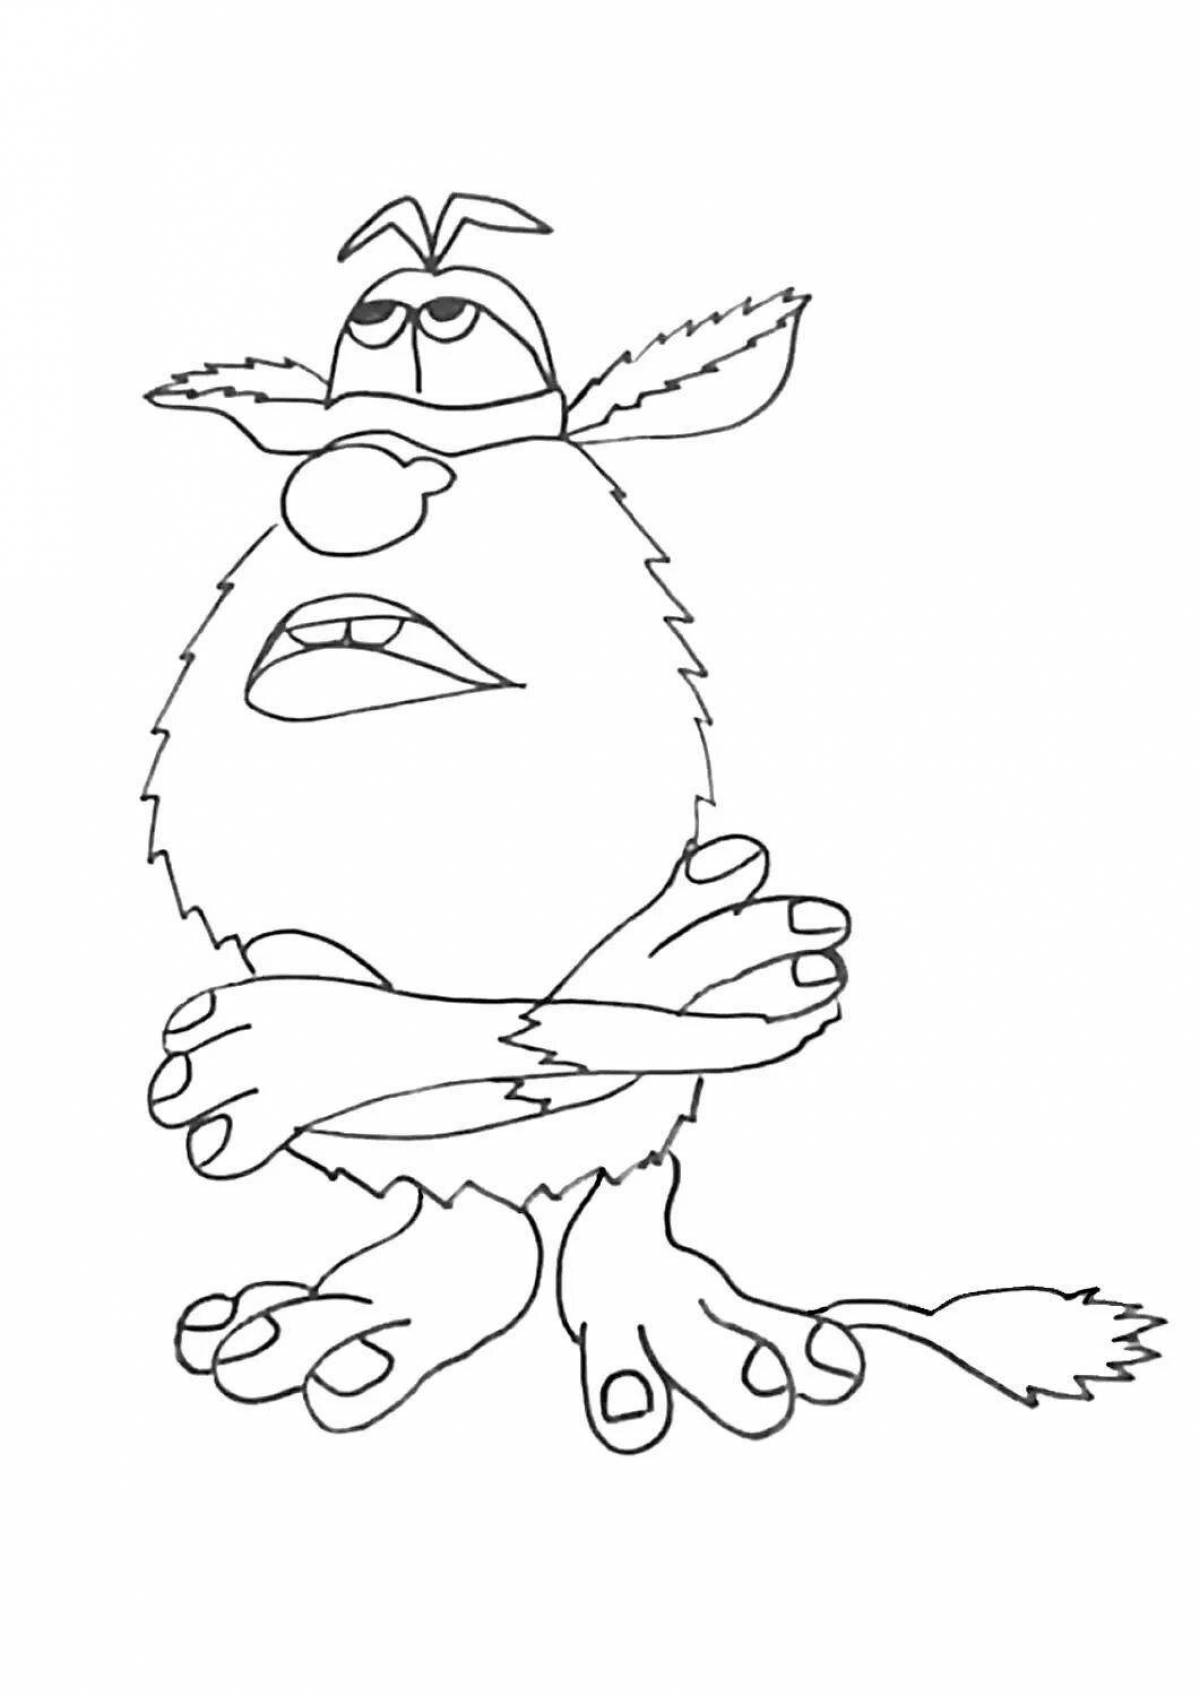 Hubba bubba live coloring page